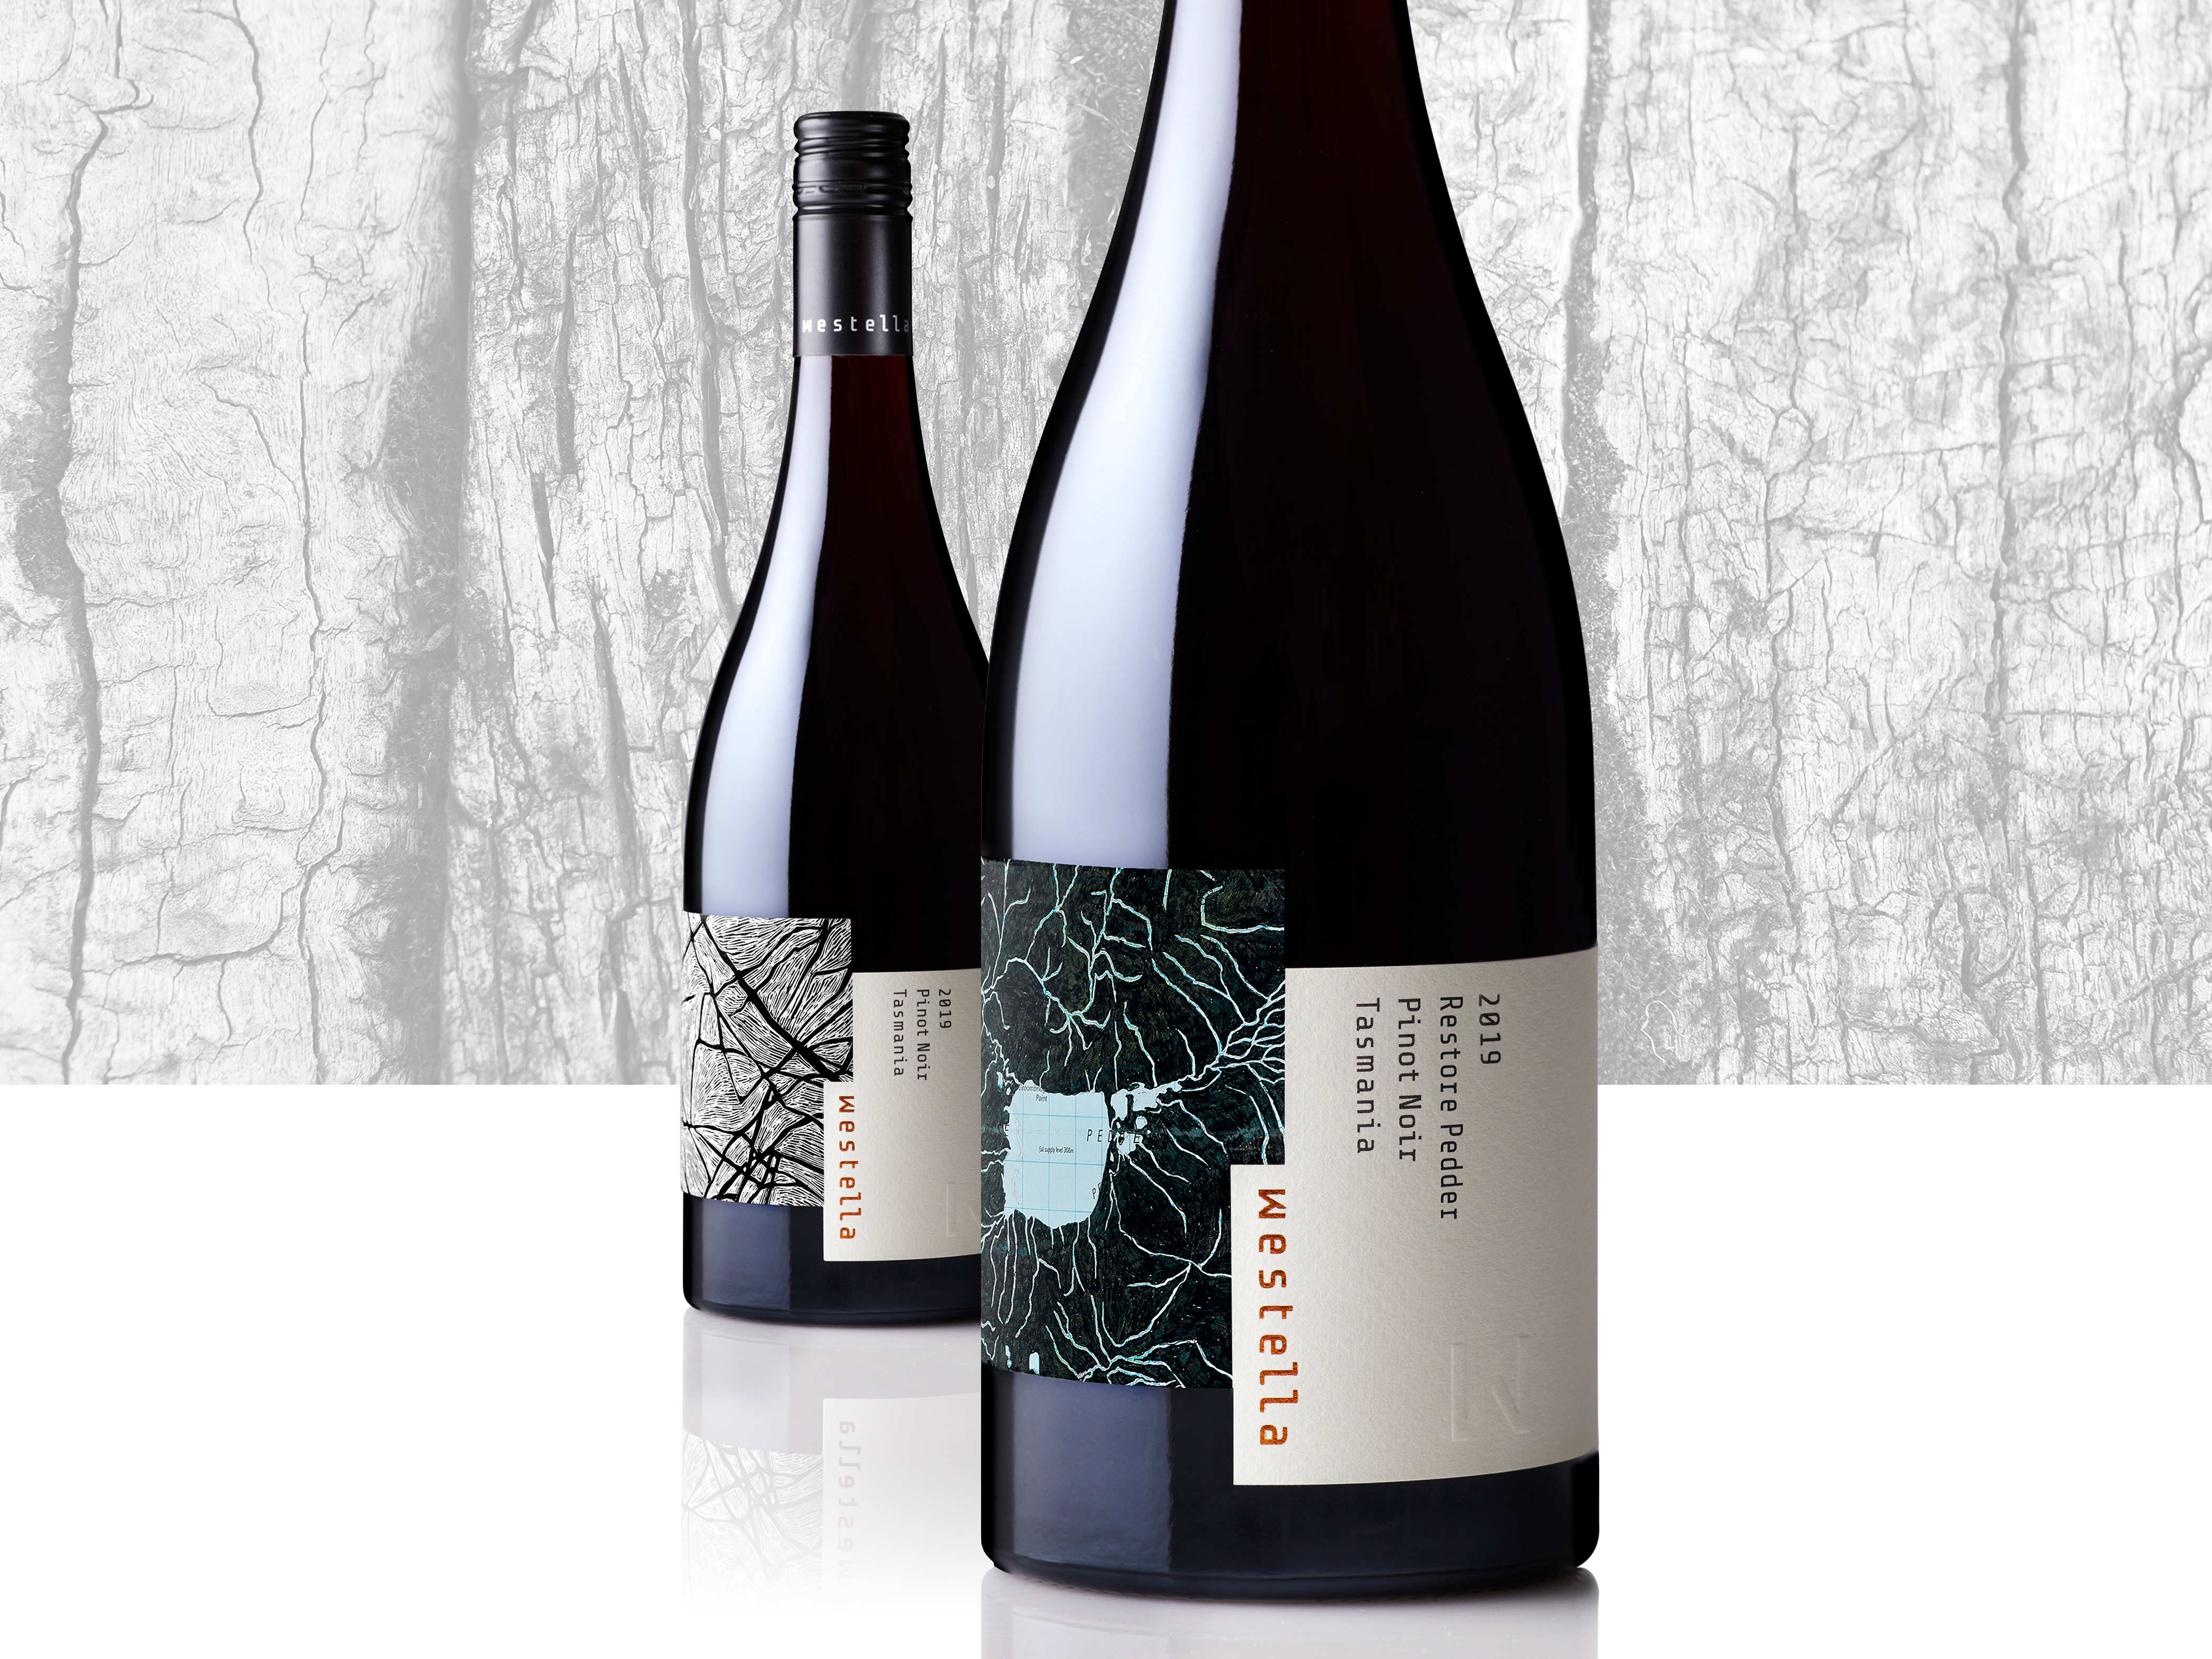 Two bottles of 2019 vintage Westella Pinot Noir sitting one behind the other against a backdrop of tree bark. Both bottles feature labels with artwork by Sue Lovegrove. The bottle towards the back has the work titled, ‘The long walk, Skullbone Plains, Tasmania’ (2014) which is a black and white abstract pattern. The bottle at the front is a special release label featuring a detail from ‘Mapping the invisible, [reconstructed map]’ (2021) that Sue created for the water[shed] exhibition.